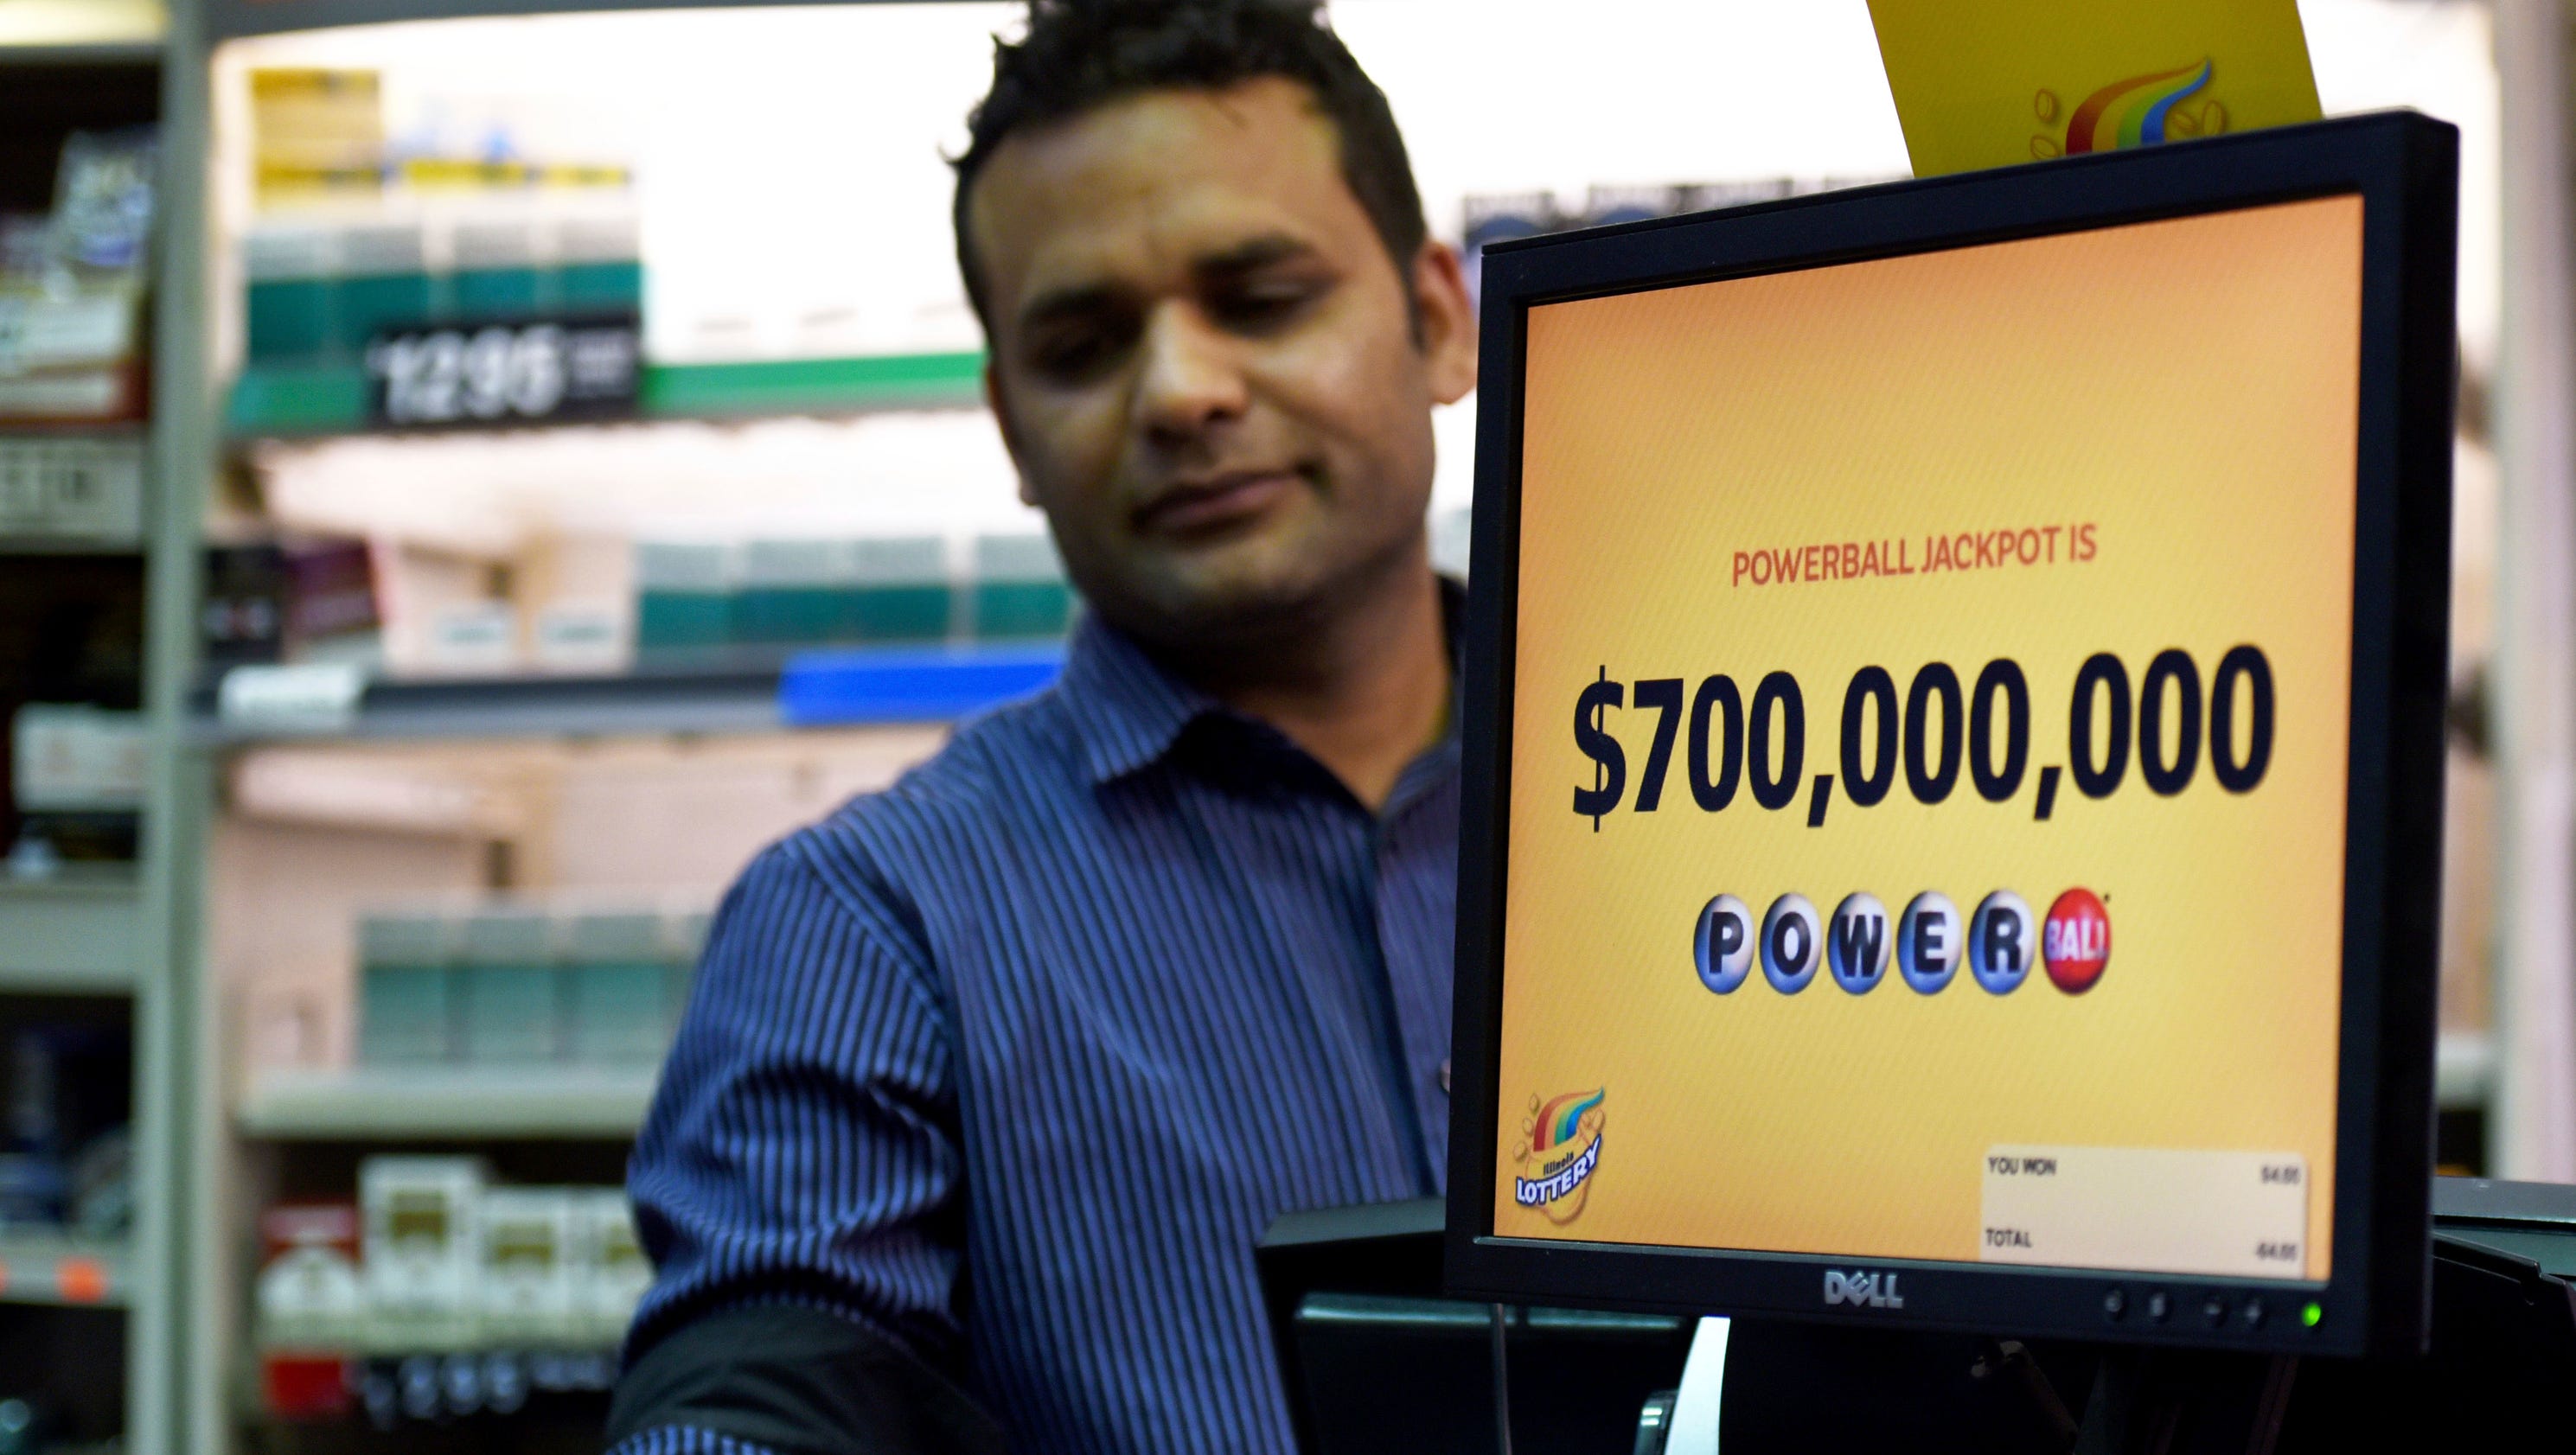 Well, did you win the $700 million Powerball jackpot?